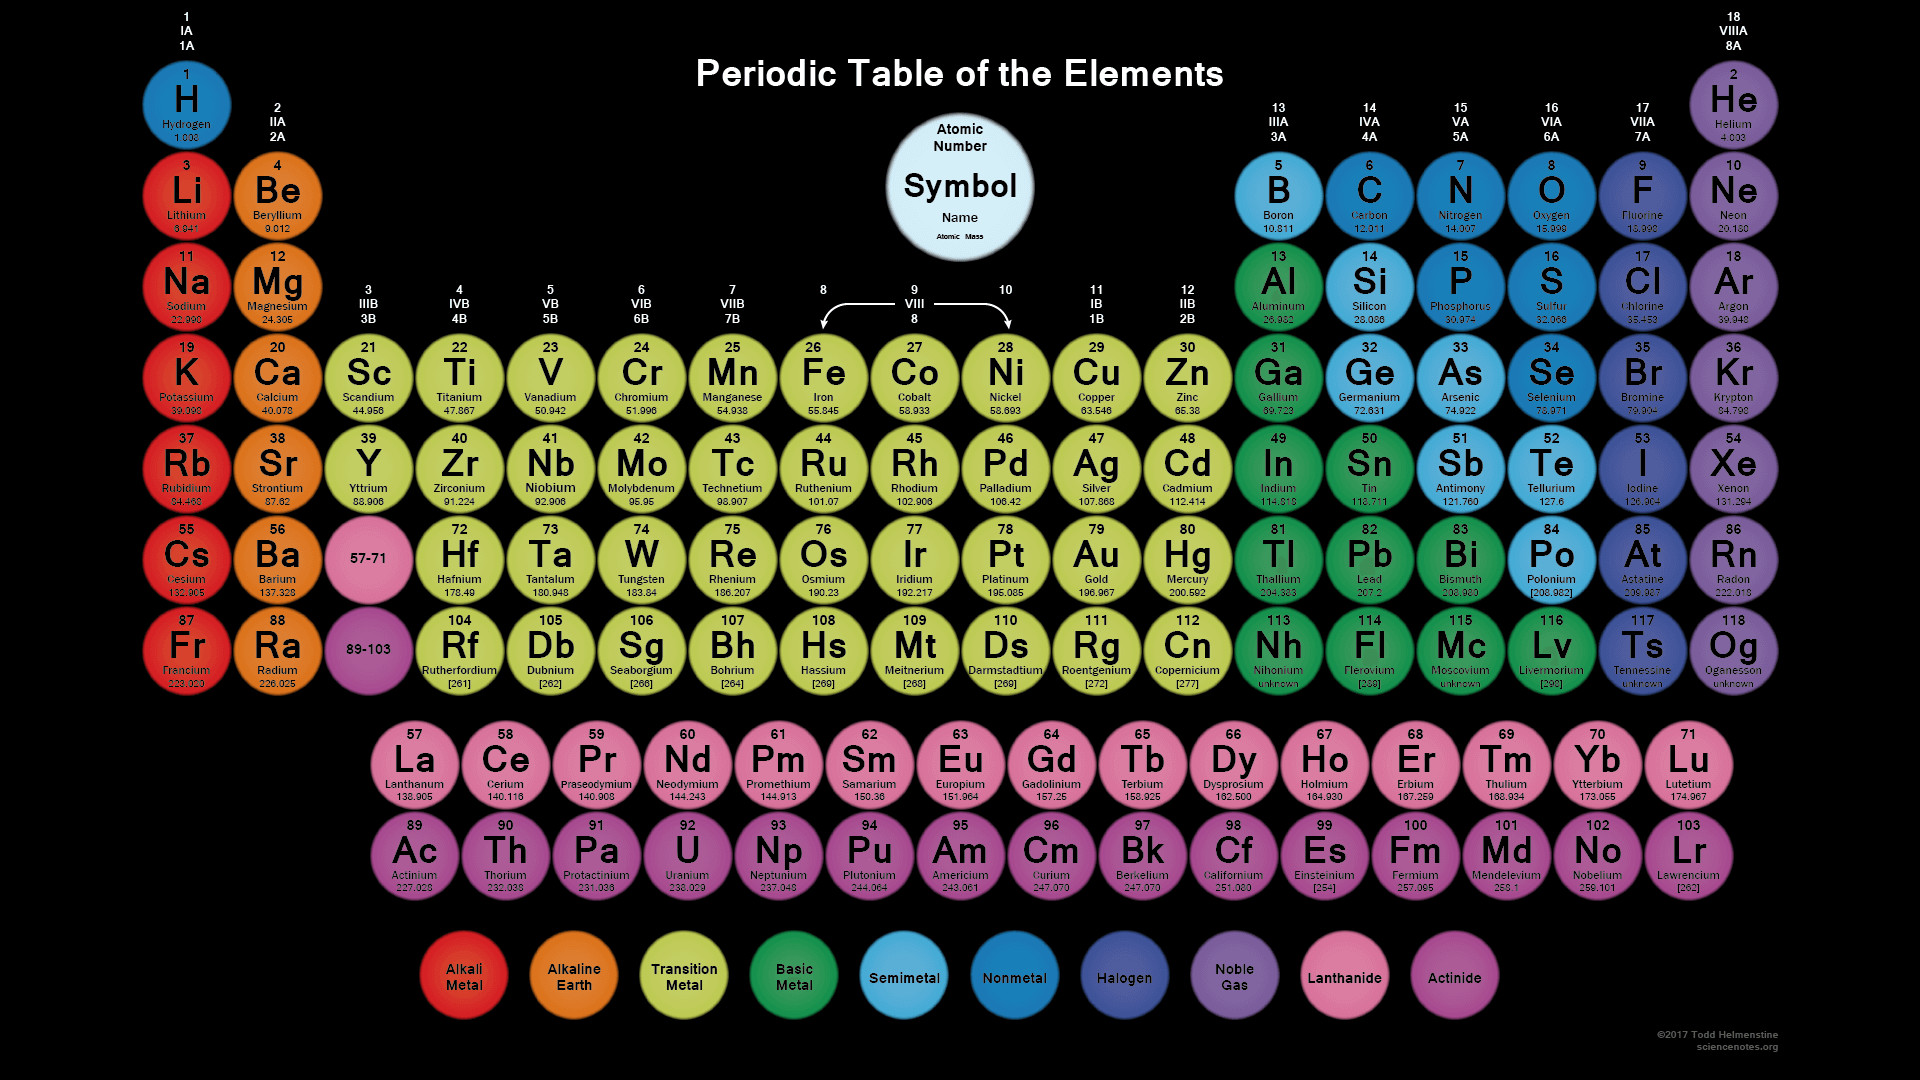 1920x1080 This periodic table wallpaper has a futuristic look with circular tiles  containing each element's atomic number, symbol, name and atomic weight.